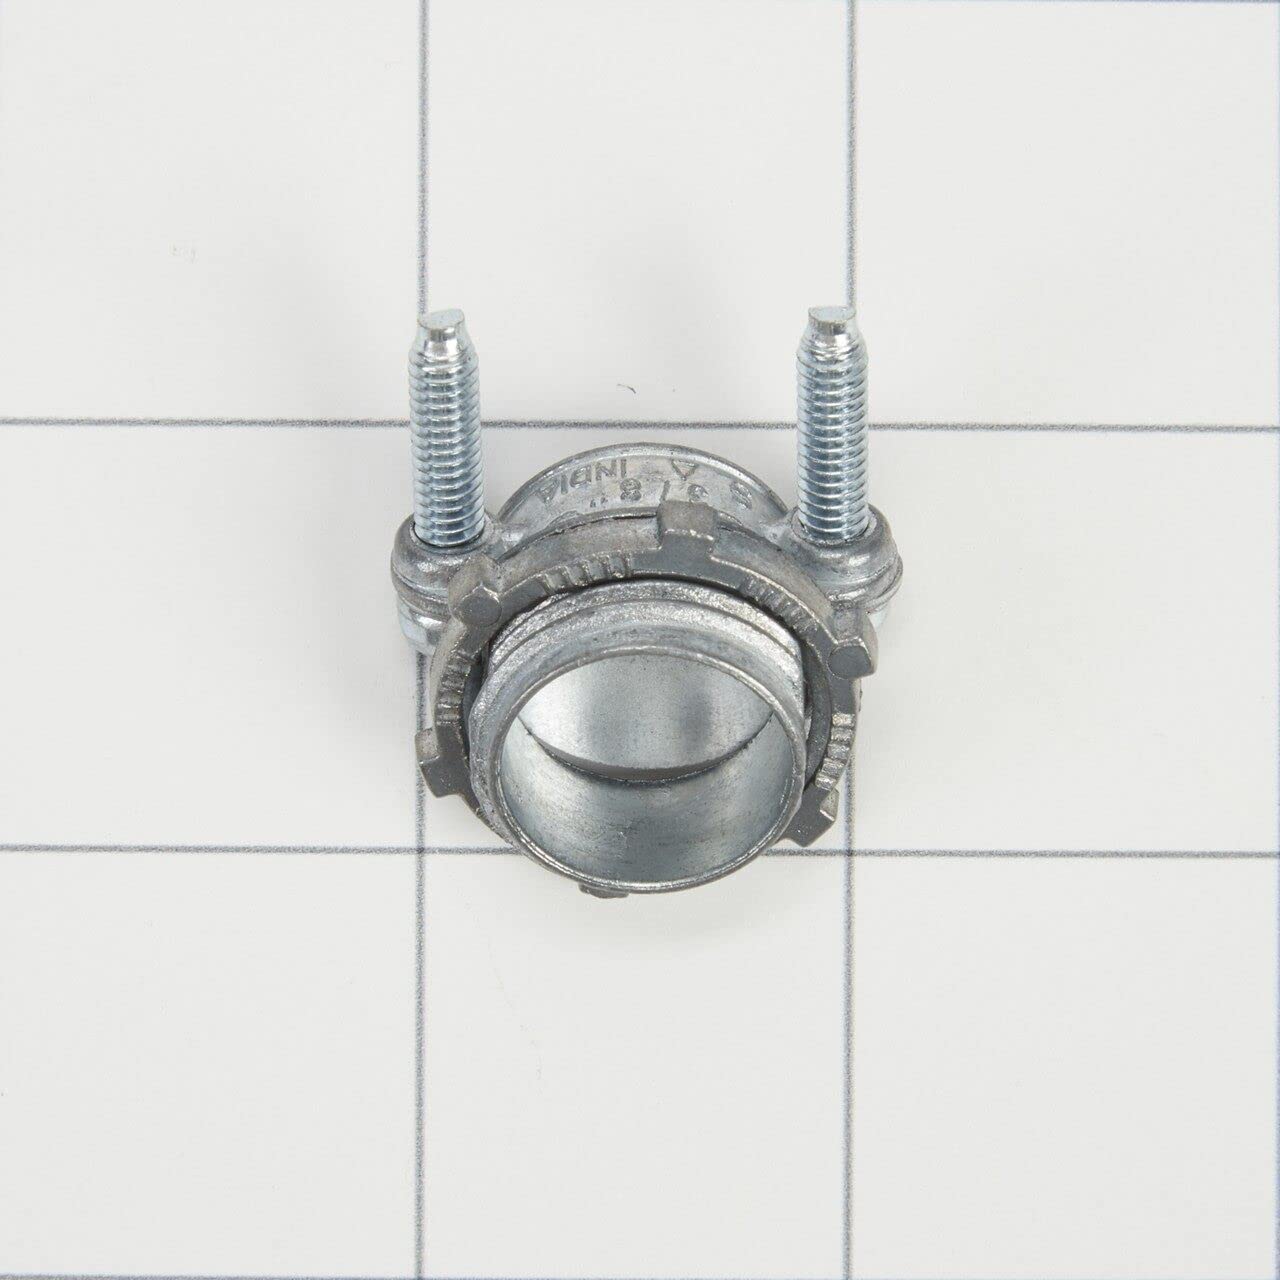 Whirlpool Part Number 4396672: CONNECTOR Silver, 1 inch